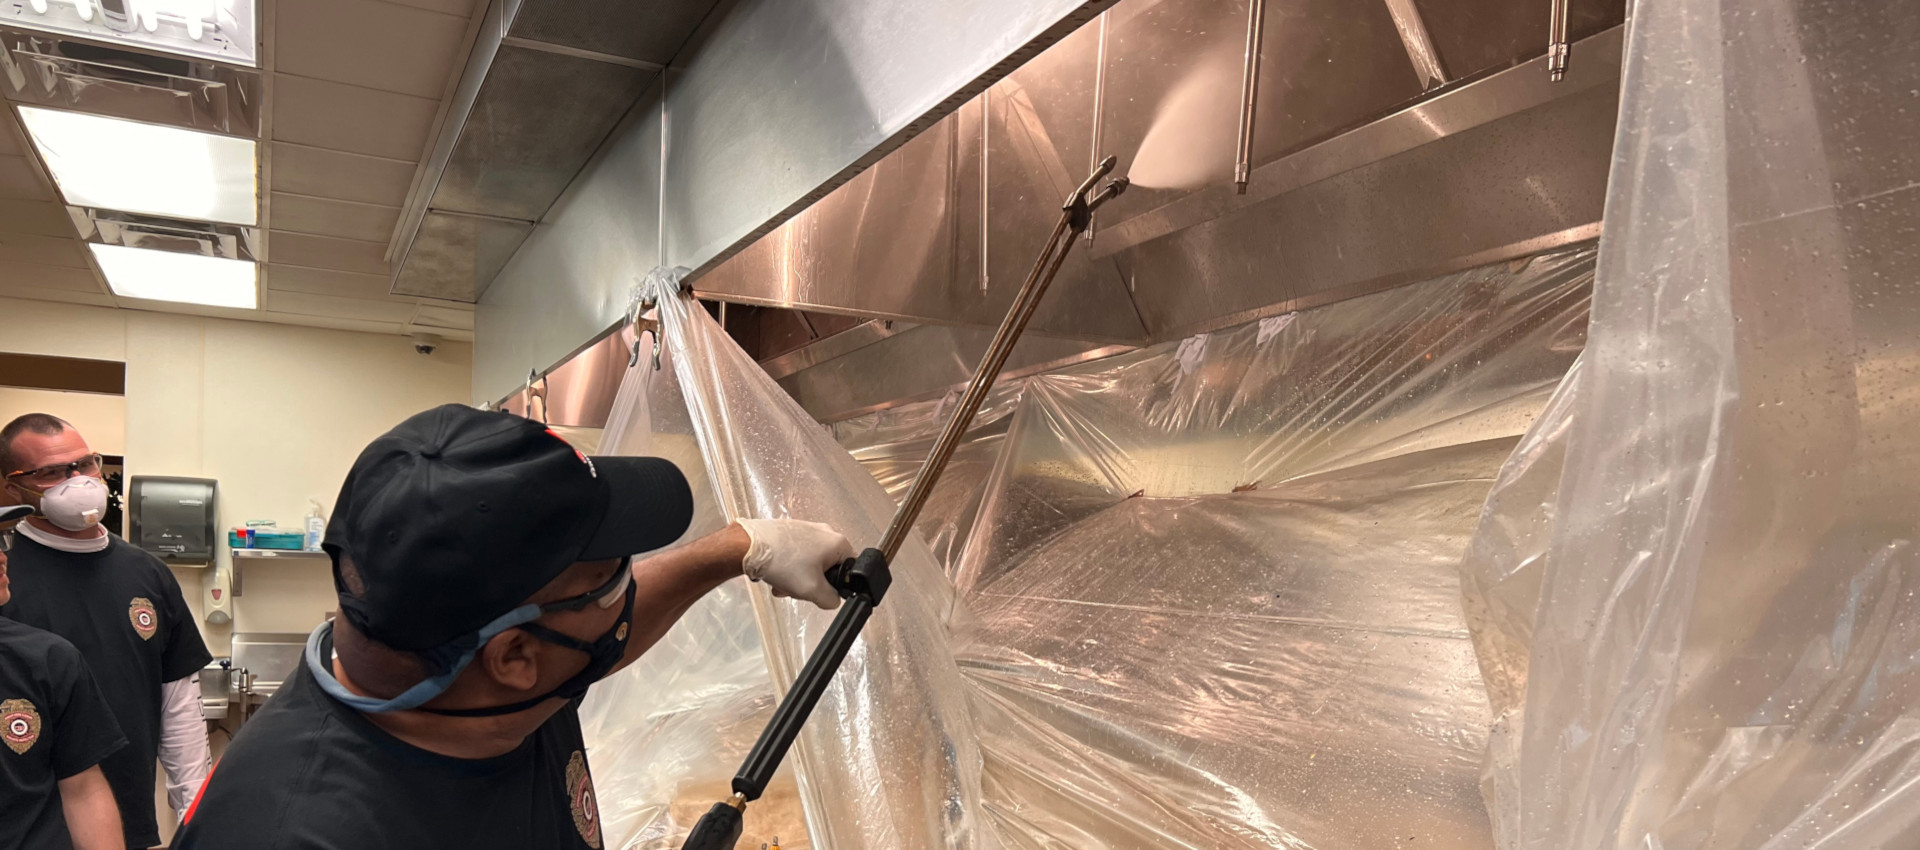 Commercial Kitchen Exhaust Hood Cleaning Training & Certification